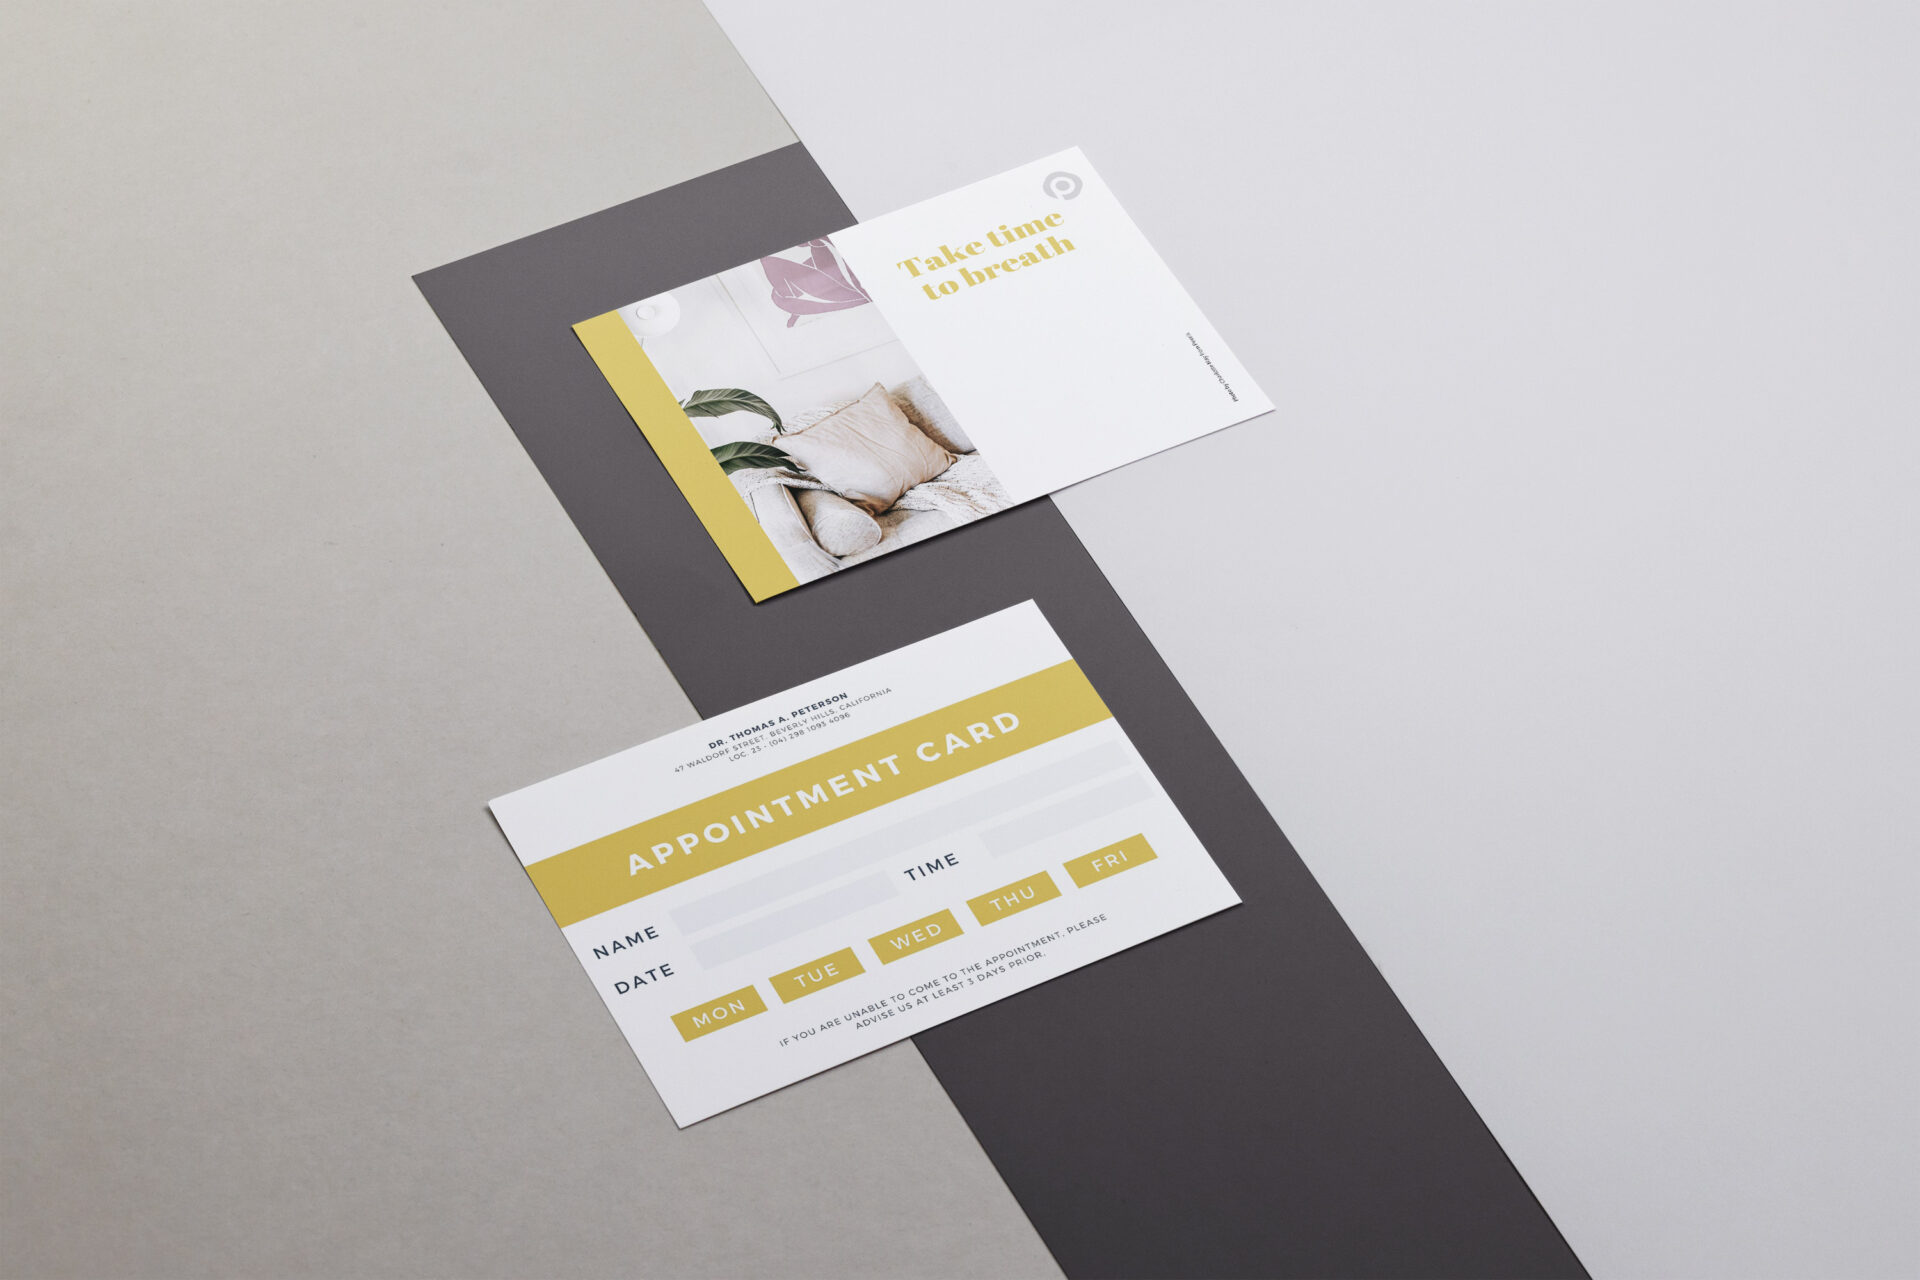 Appointment cards in Wollongong - Print with Pagerr